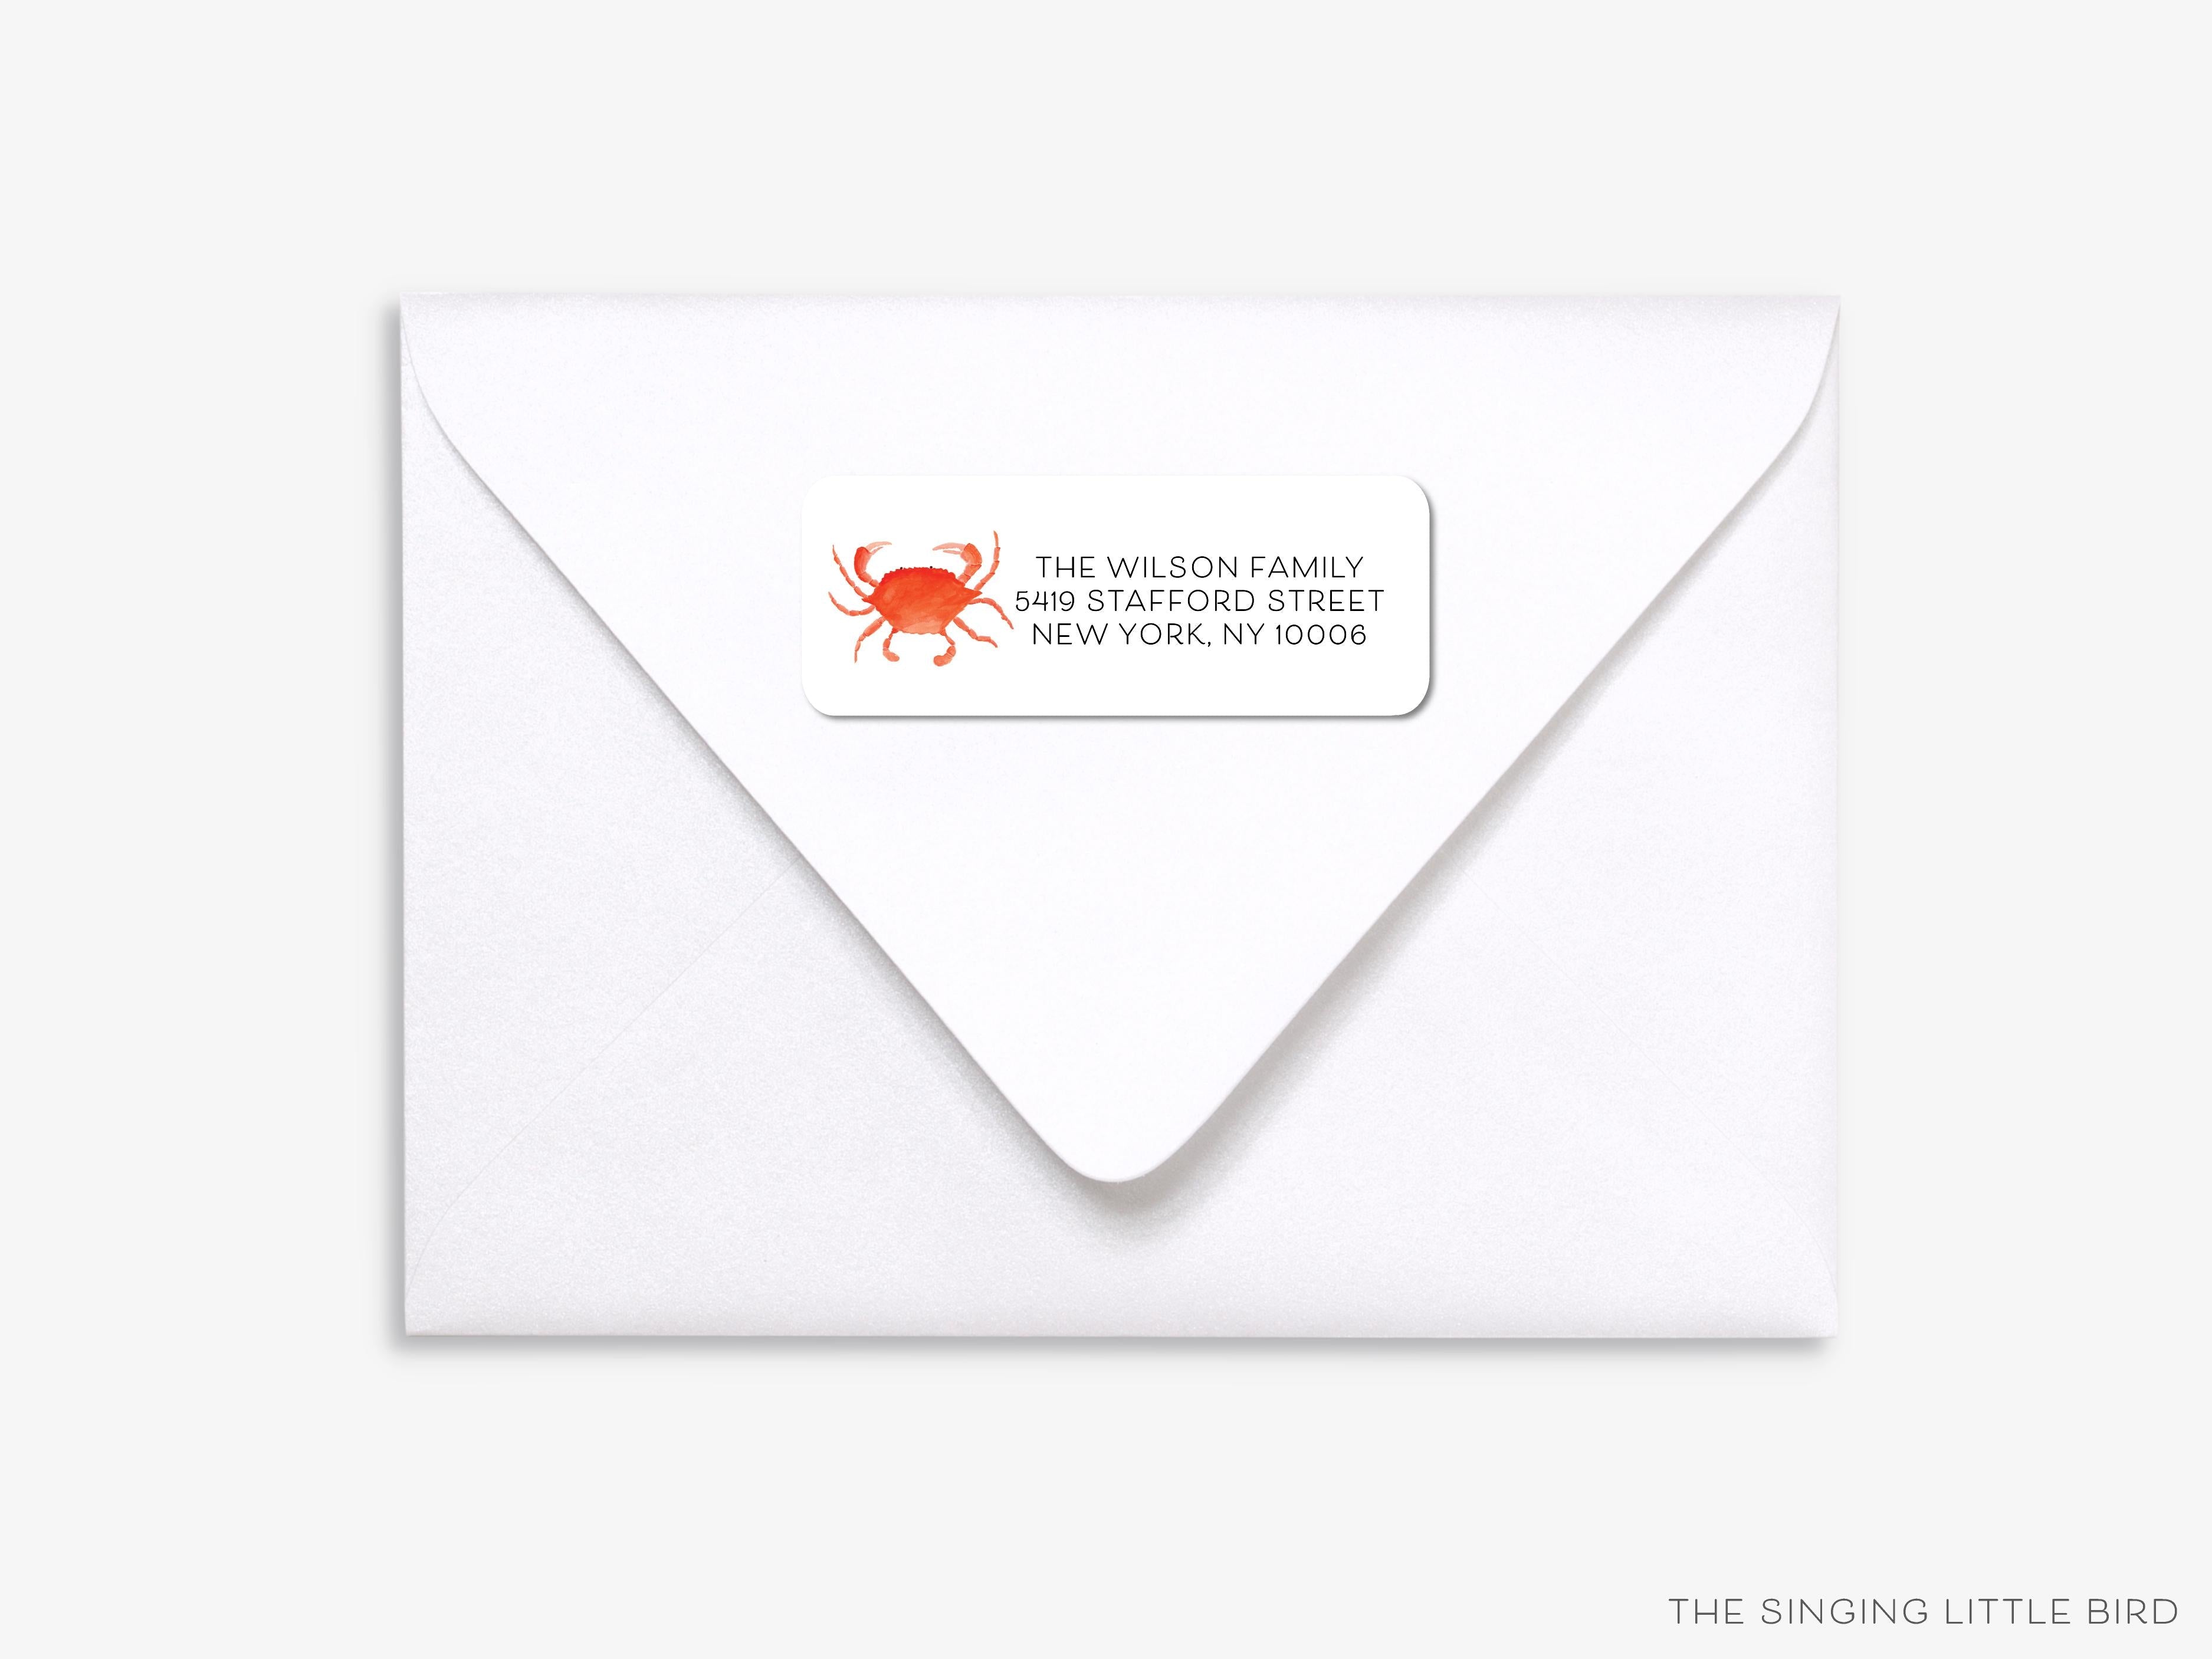 Red Crab Return Address Labels-These personalized return address labels are 2.625" x 1" and feature our hand-painted watercolor Red Crab, printed in the USA on beautiful matte finish labels. These make great gifts for yourself or the beach lover.-The Singing Little Bird